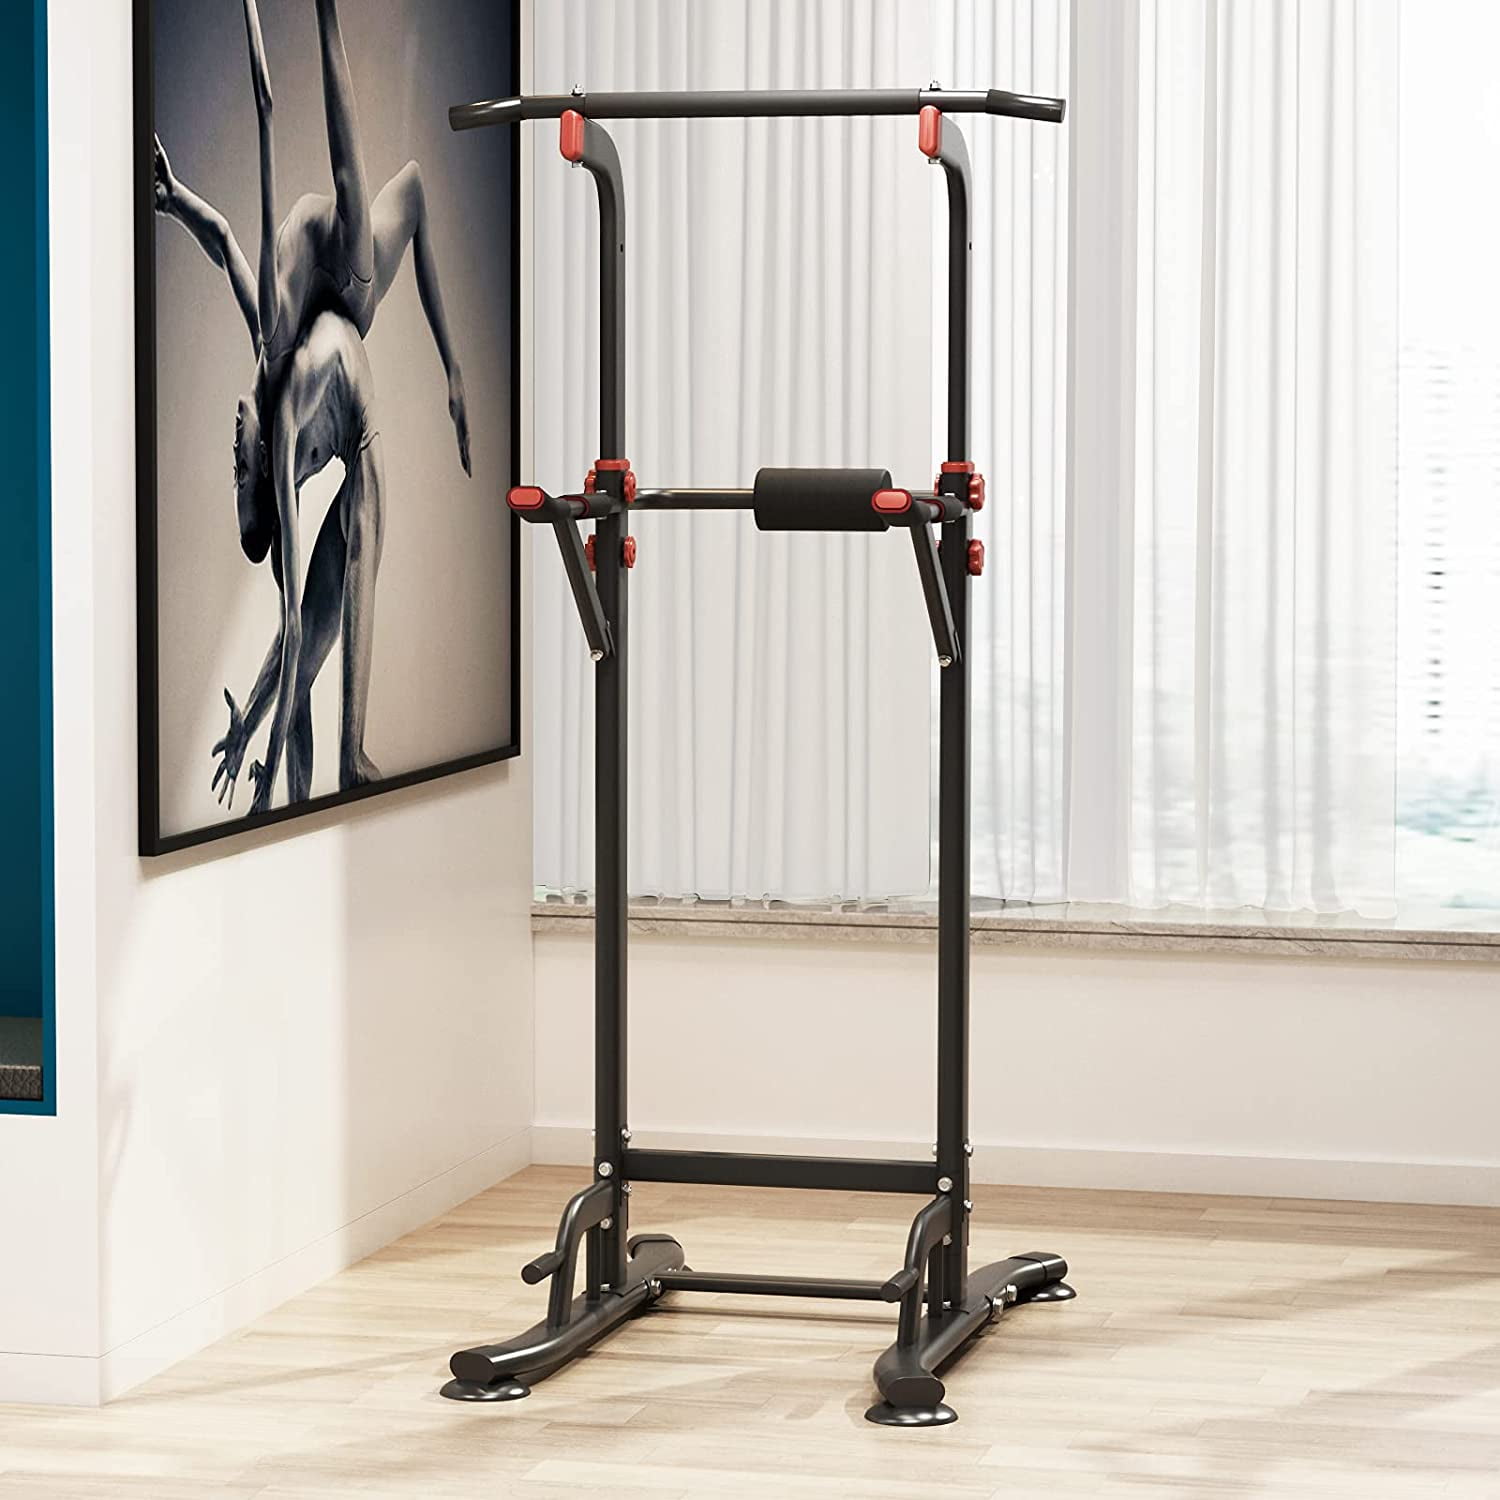 SogesHome Power Tower Pull Up Bar Dip Station Adjustable Height Dip Stand Multi-Functional Strength Training Fitness Workout Station Black 